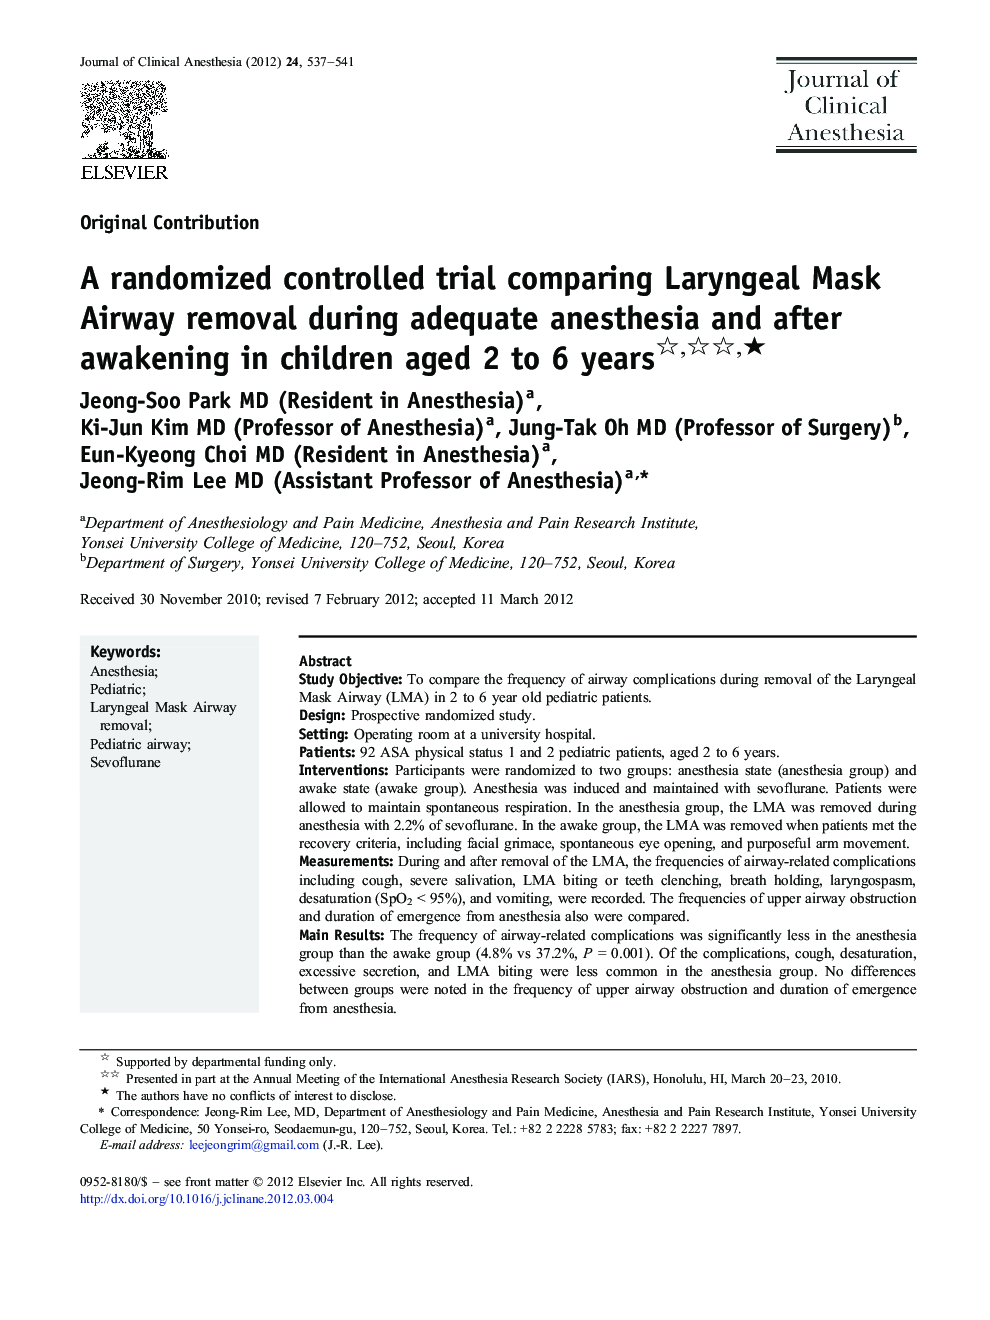 A randomized controlled trial comparing Laryngeal Mask Airway removal during adequate anesthesia and after awakening in children aged 2 to 6 years ★